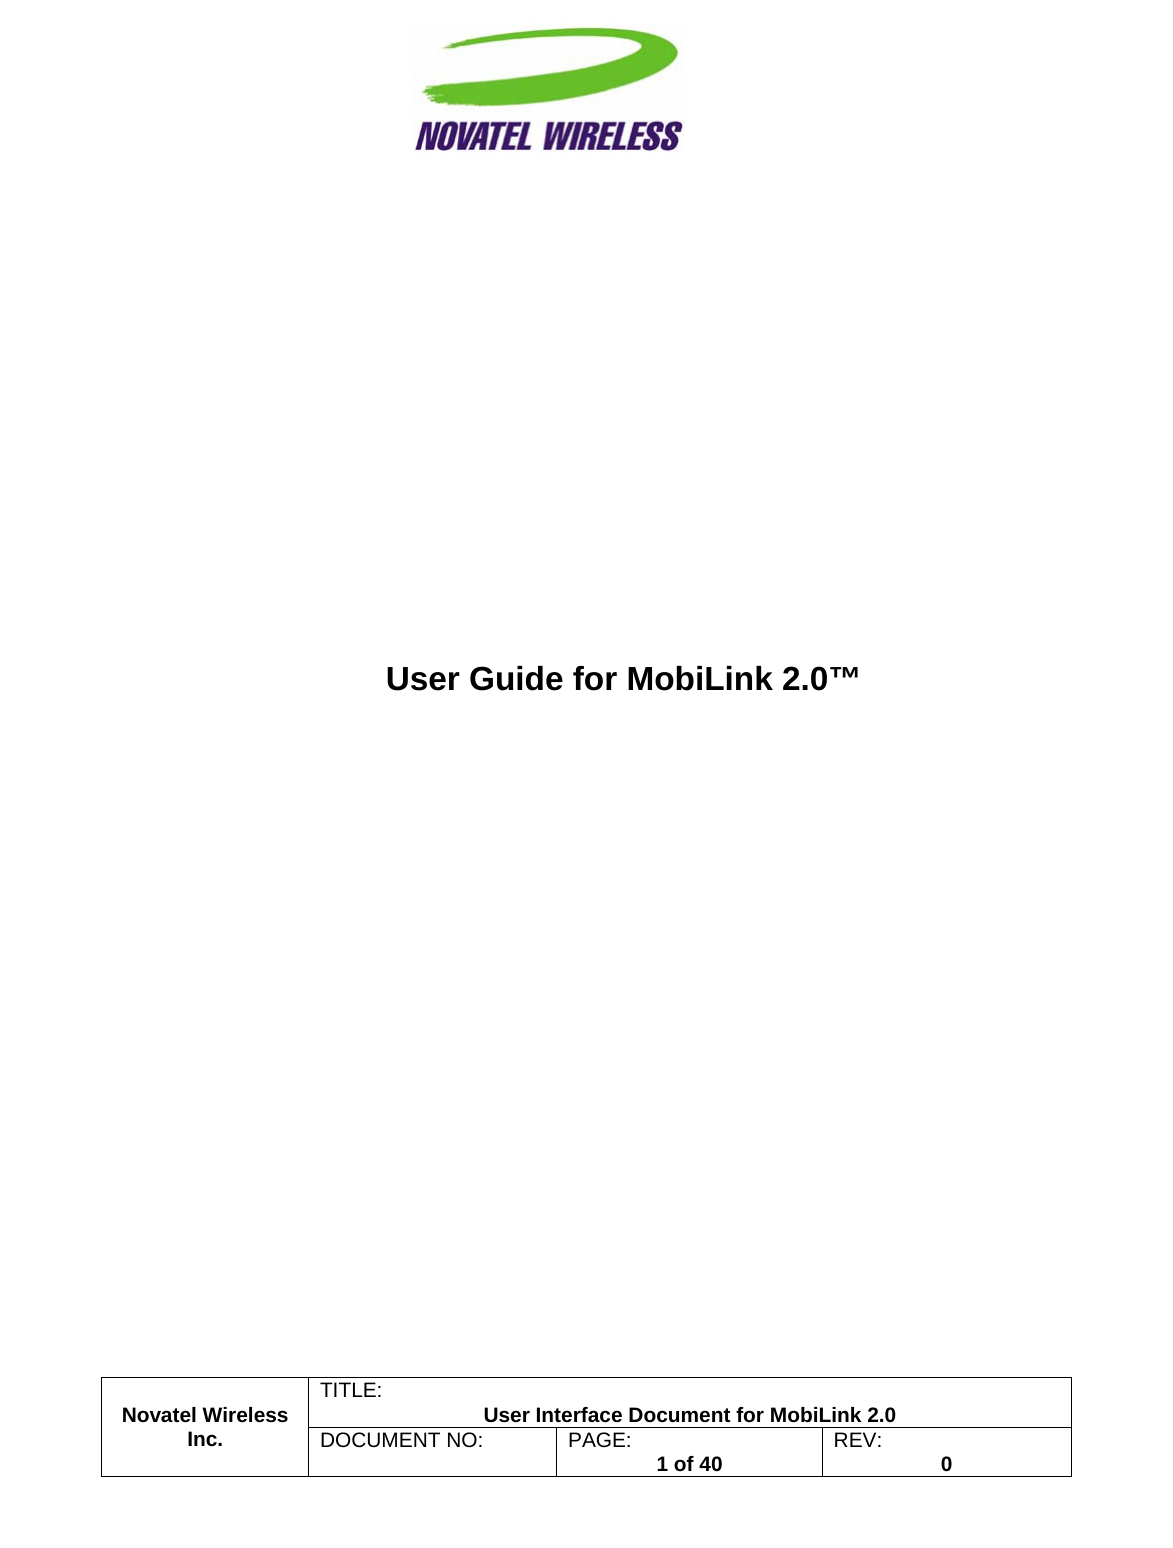                                                         TITLE:  User Interface Document for MobiLink 2.0 Novatel Wireless  Inc. DOCUMENT NO:  PAGE:   1 of 40  REV:  0                      User Guide for MobiLink 2.0™              